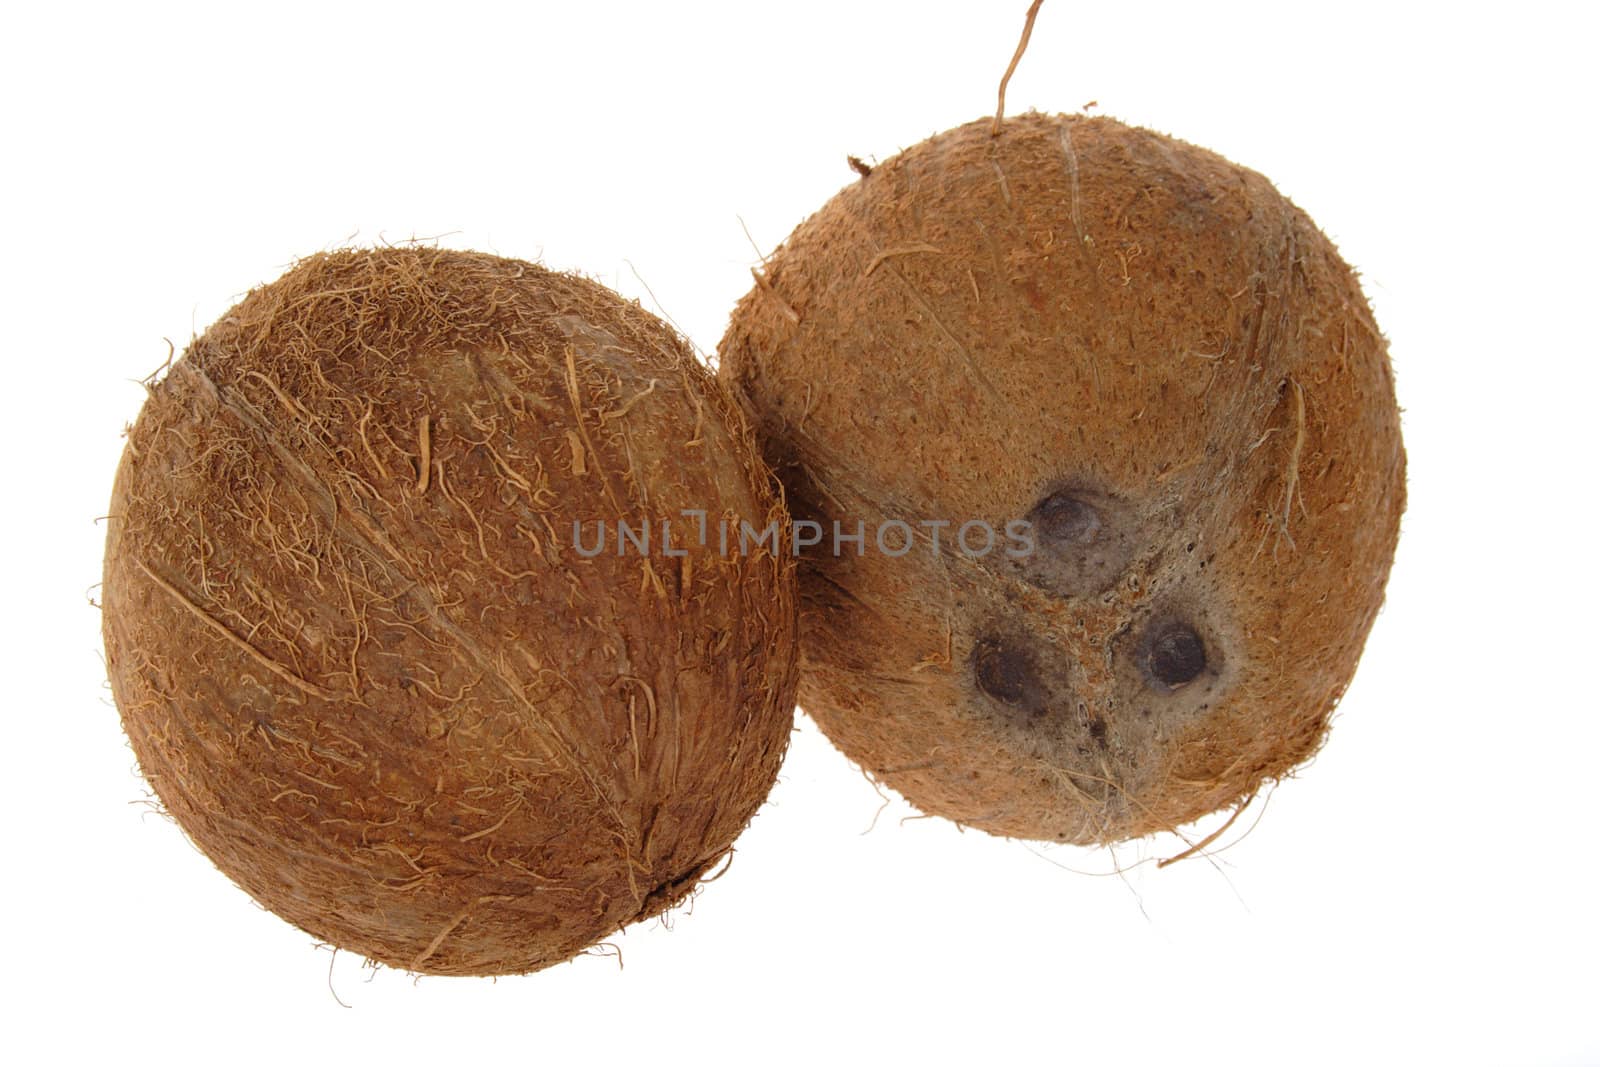 two coconut photo on the white background